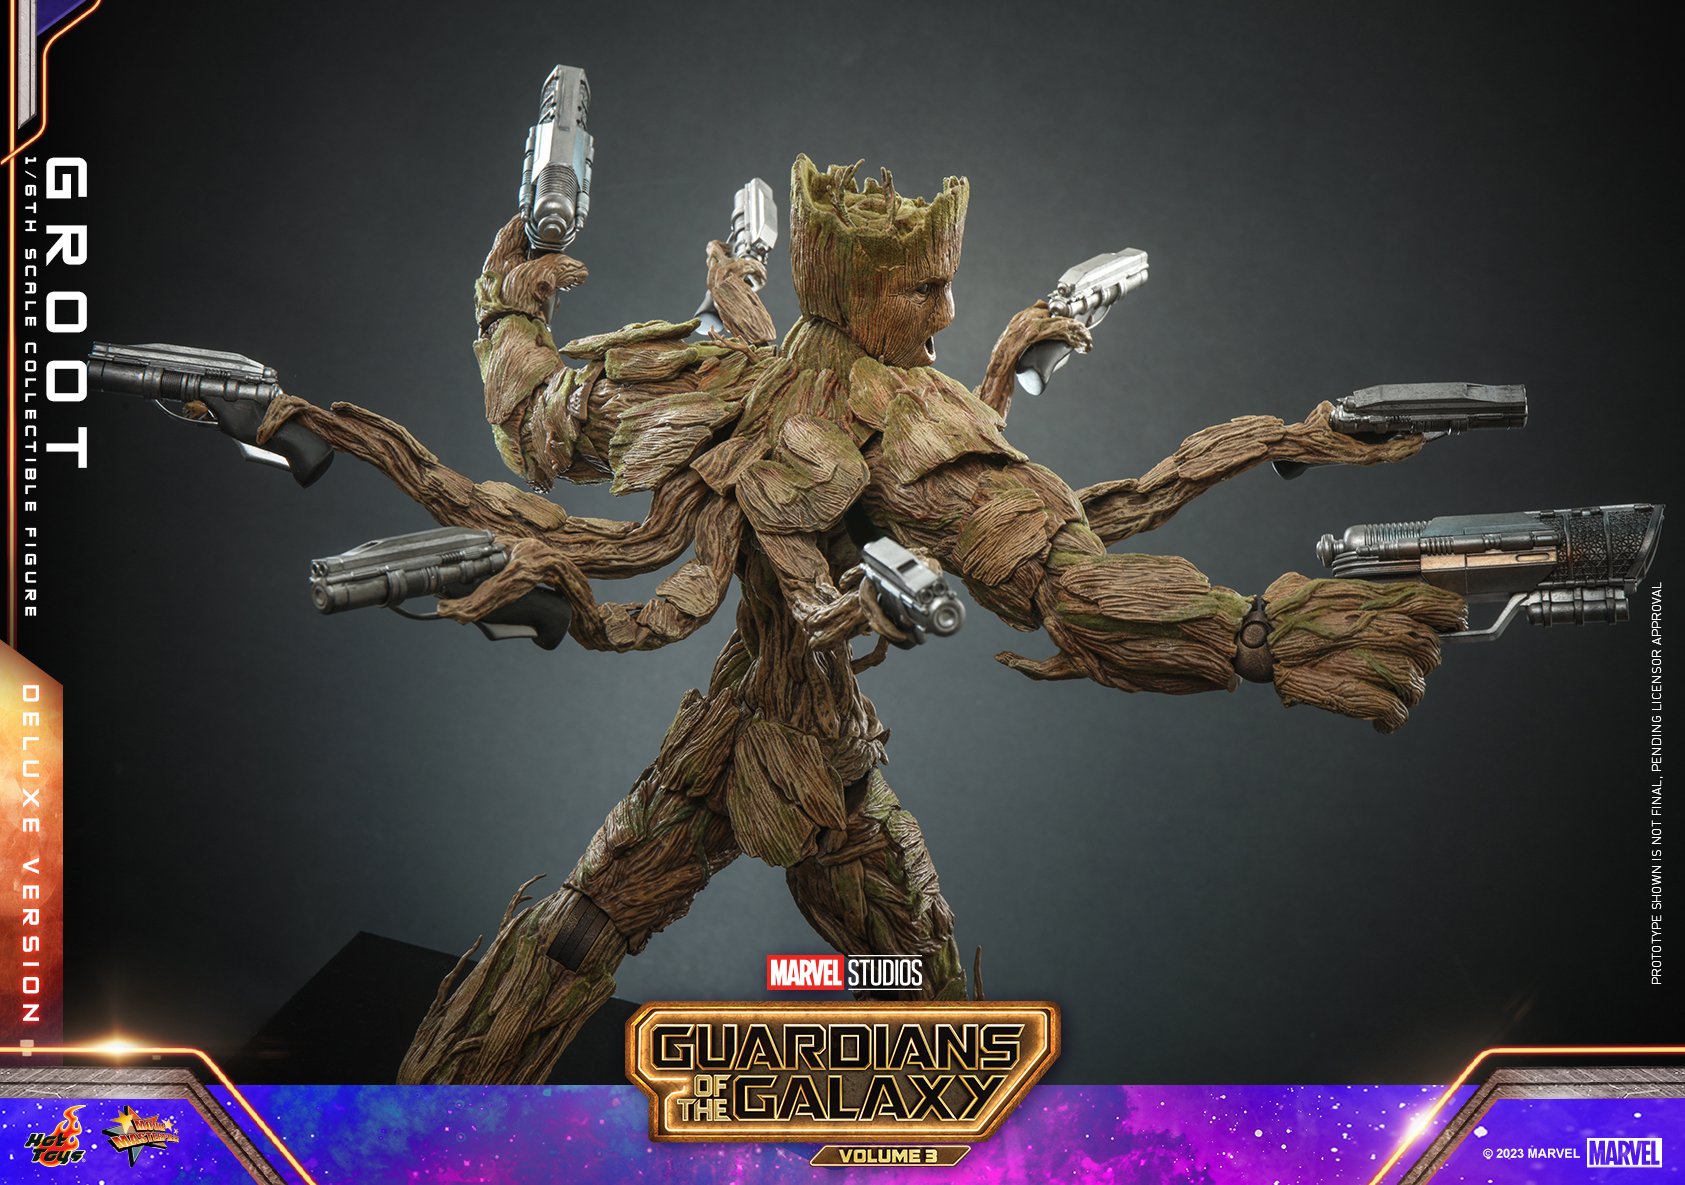 Hot-Toys-GotG3-Groot-Deluxe-003.jpeg